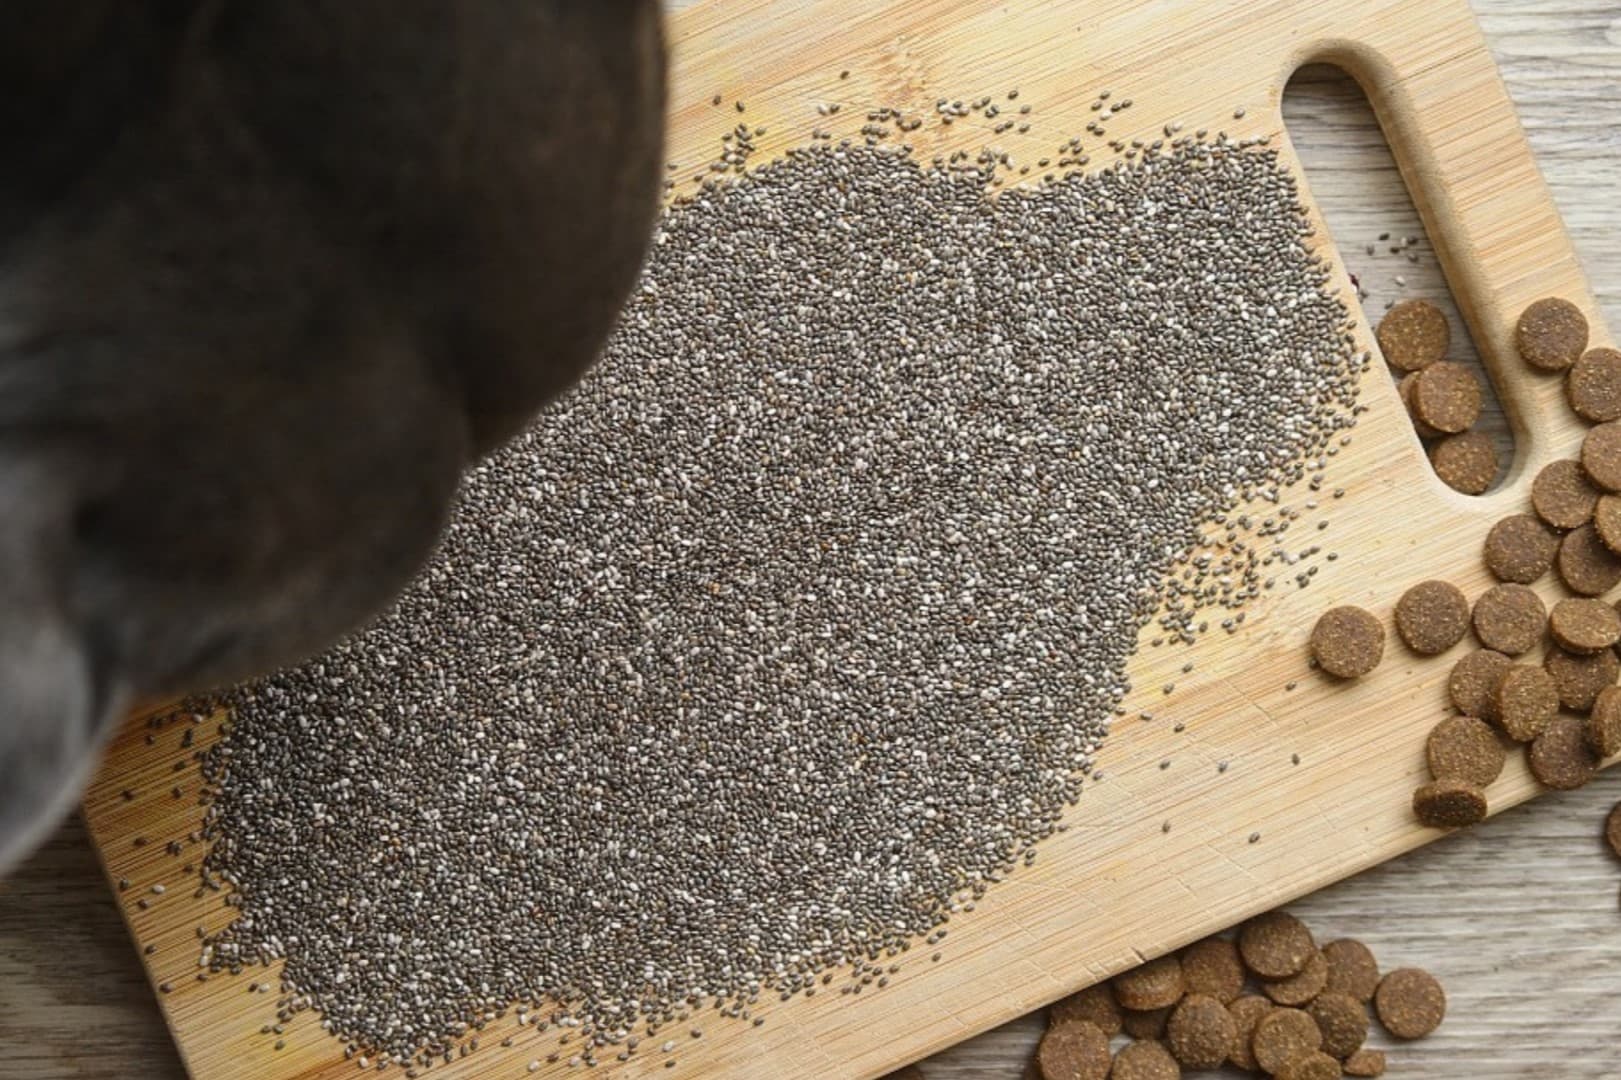 How To Prepare Chia Seeds For Dogs